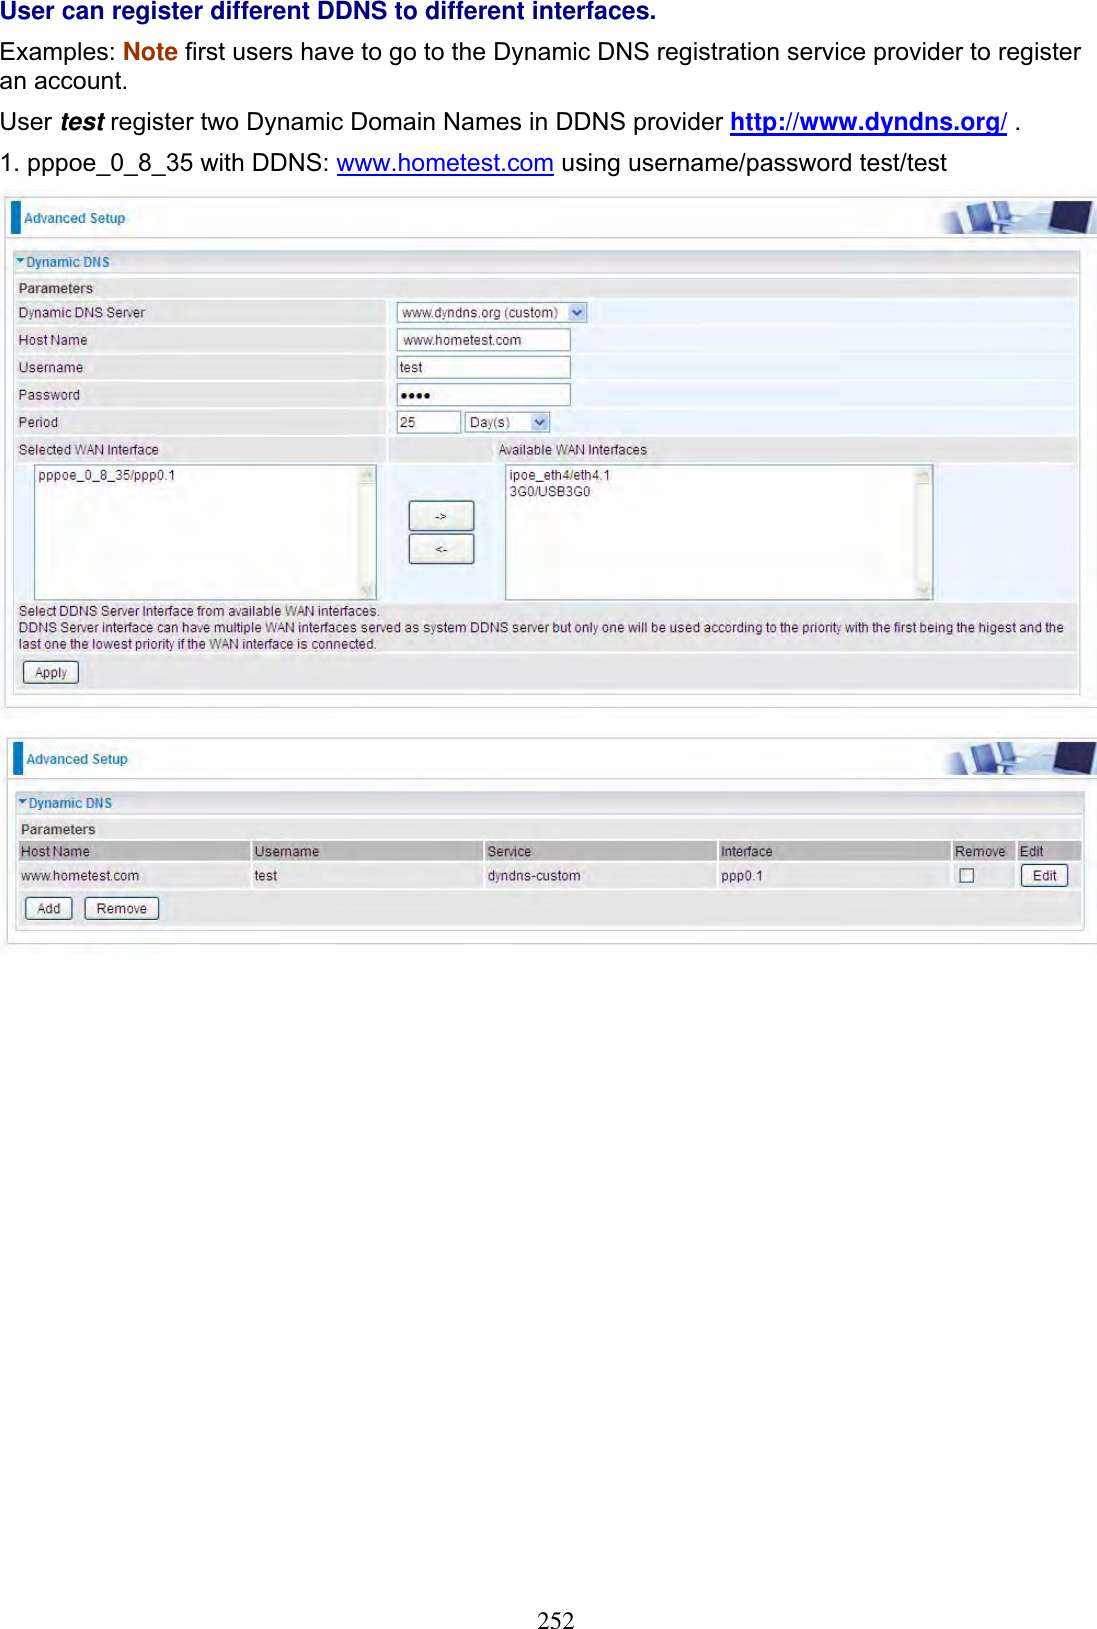 252User can register different DDNS to different interfaces. Examples: Note first users have to go to the Dynamic DNS registration service provider to register an account. User test register two Dynamic Domain Names in DDNS provider http://www.dyndns.org/ .1. pppoe_0_8_35 with DDNS: www.hometest.com using username/password test/test 